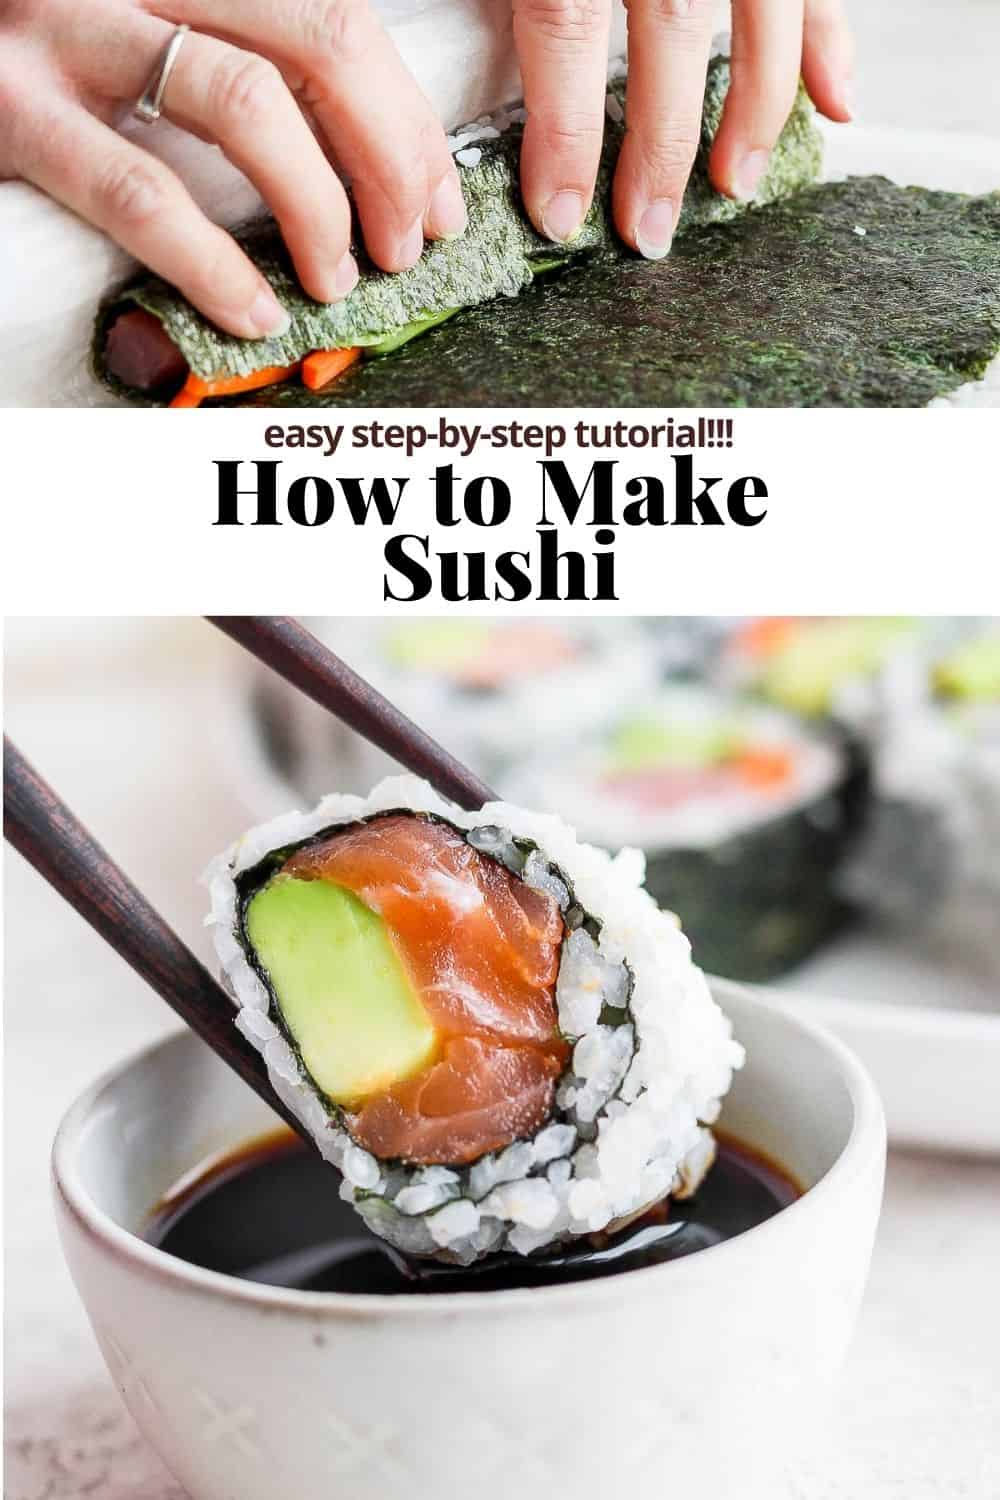 Pinterest image for how to make sushi.